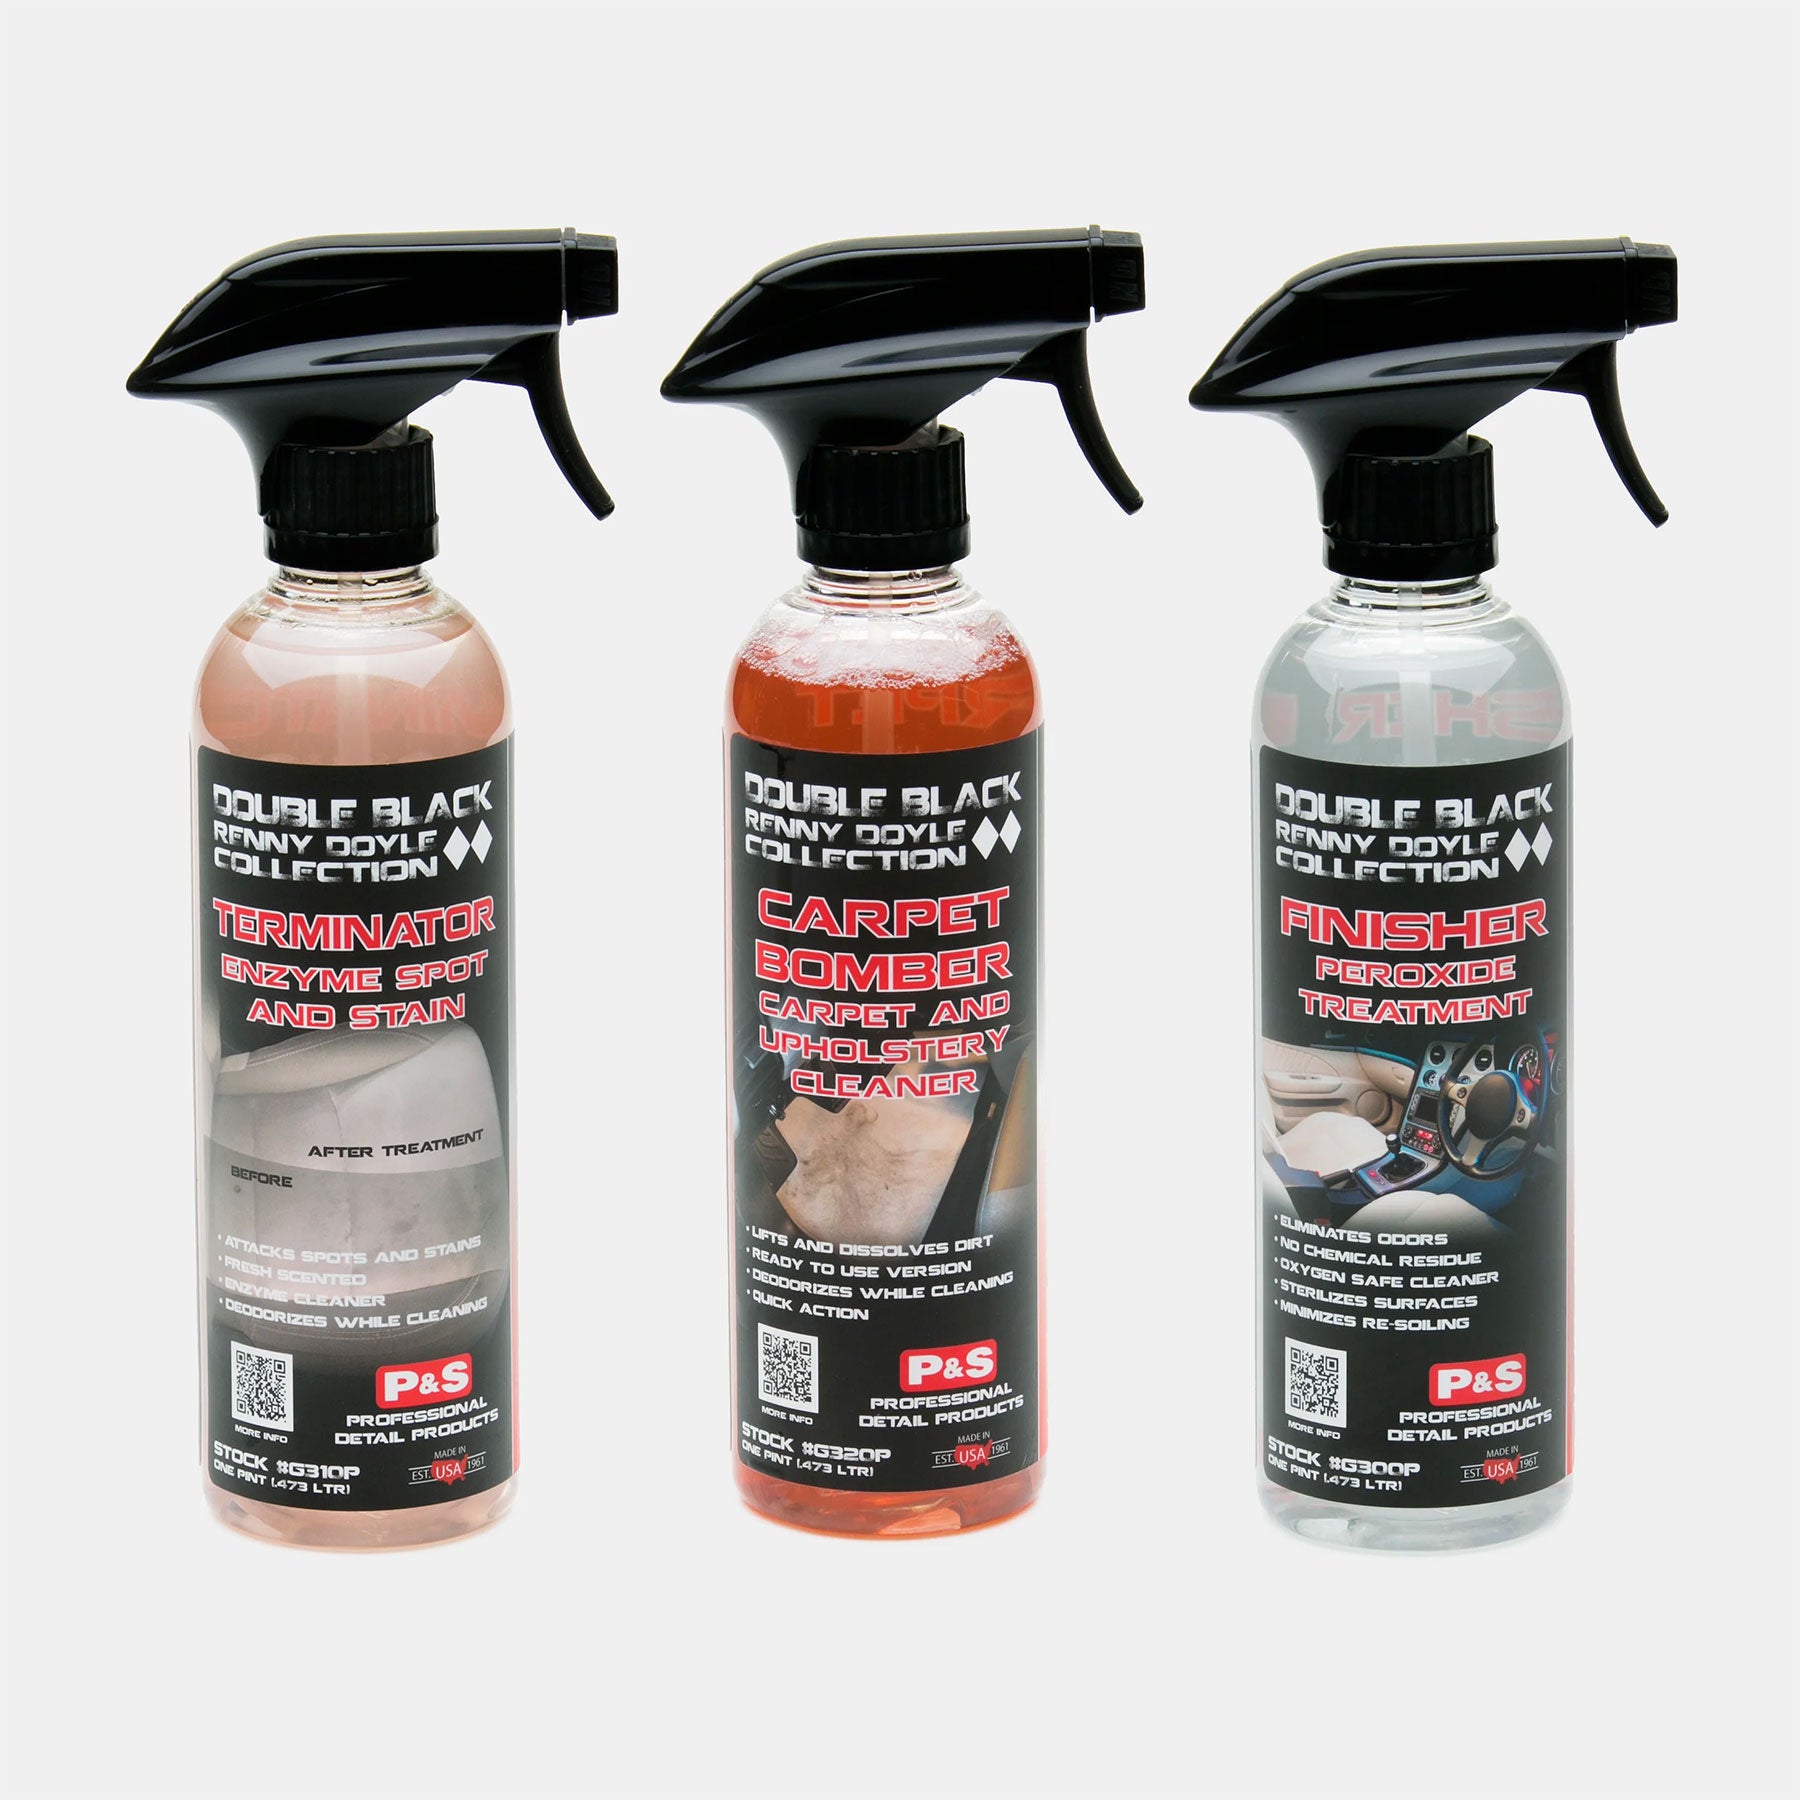 The Double Black Team – P & S Detail Products